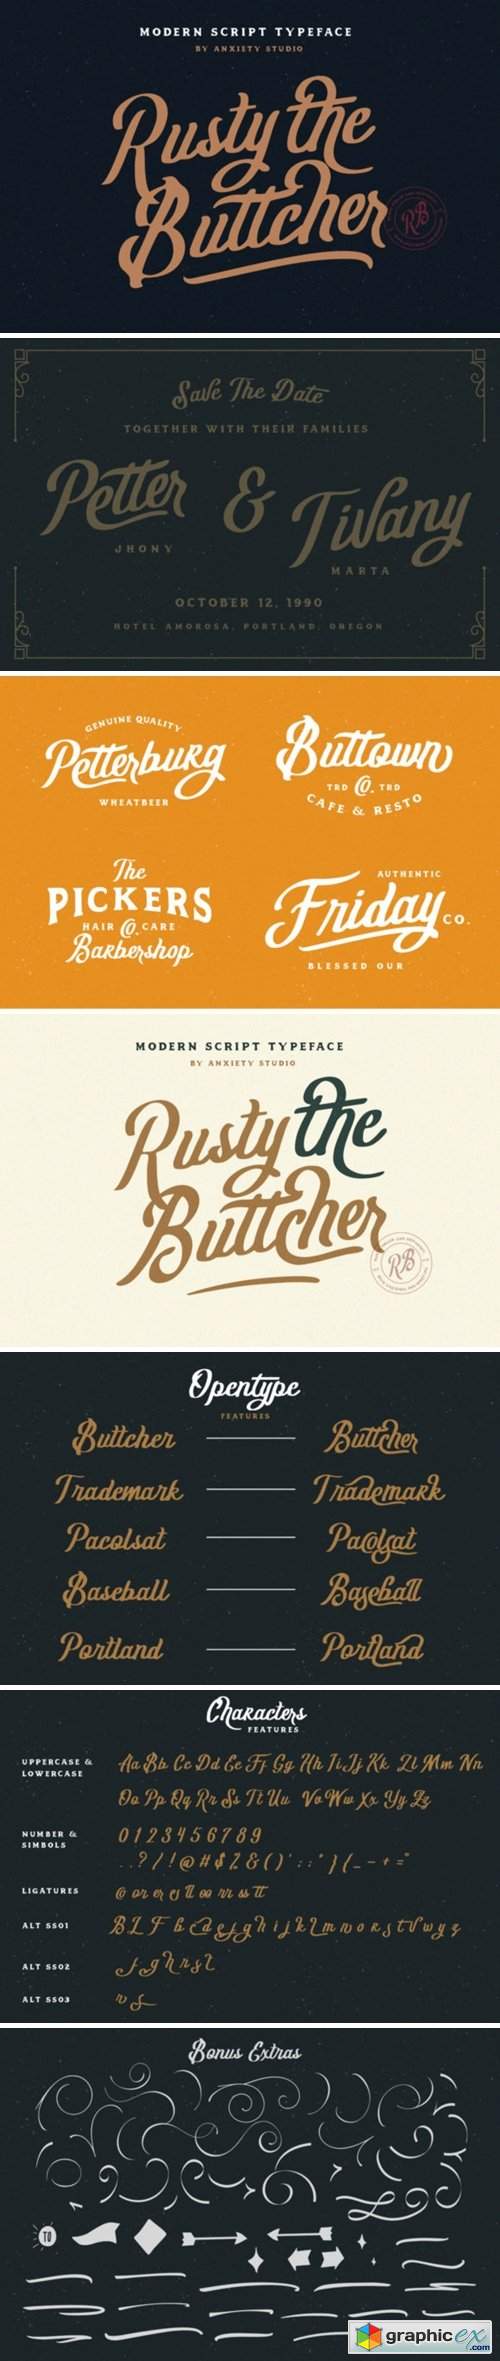 Rusty the Buttcher Font